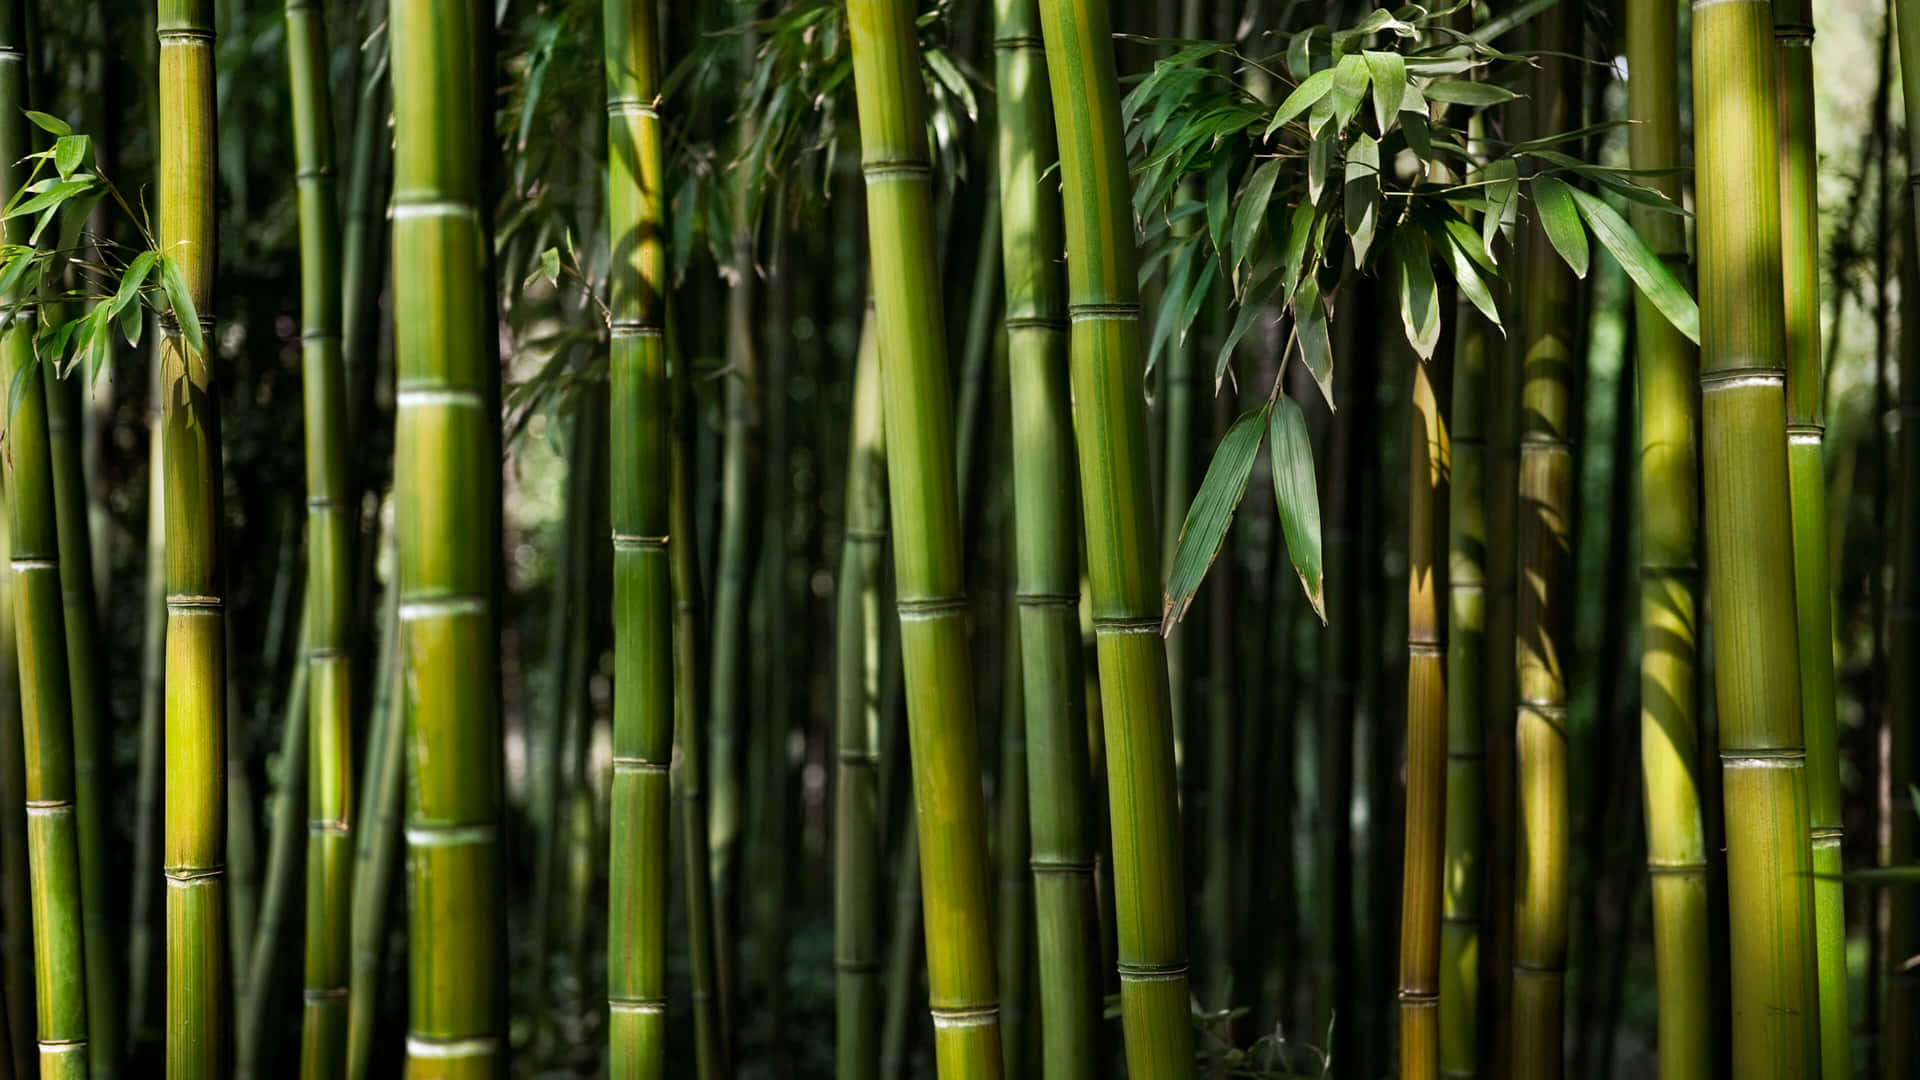 Relax And Rejuvenate In A Majestic Bamboo Forest